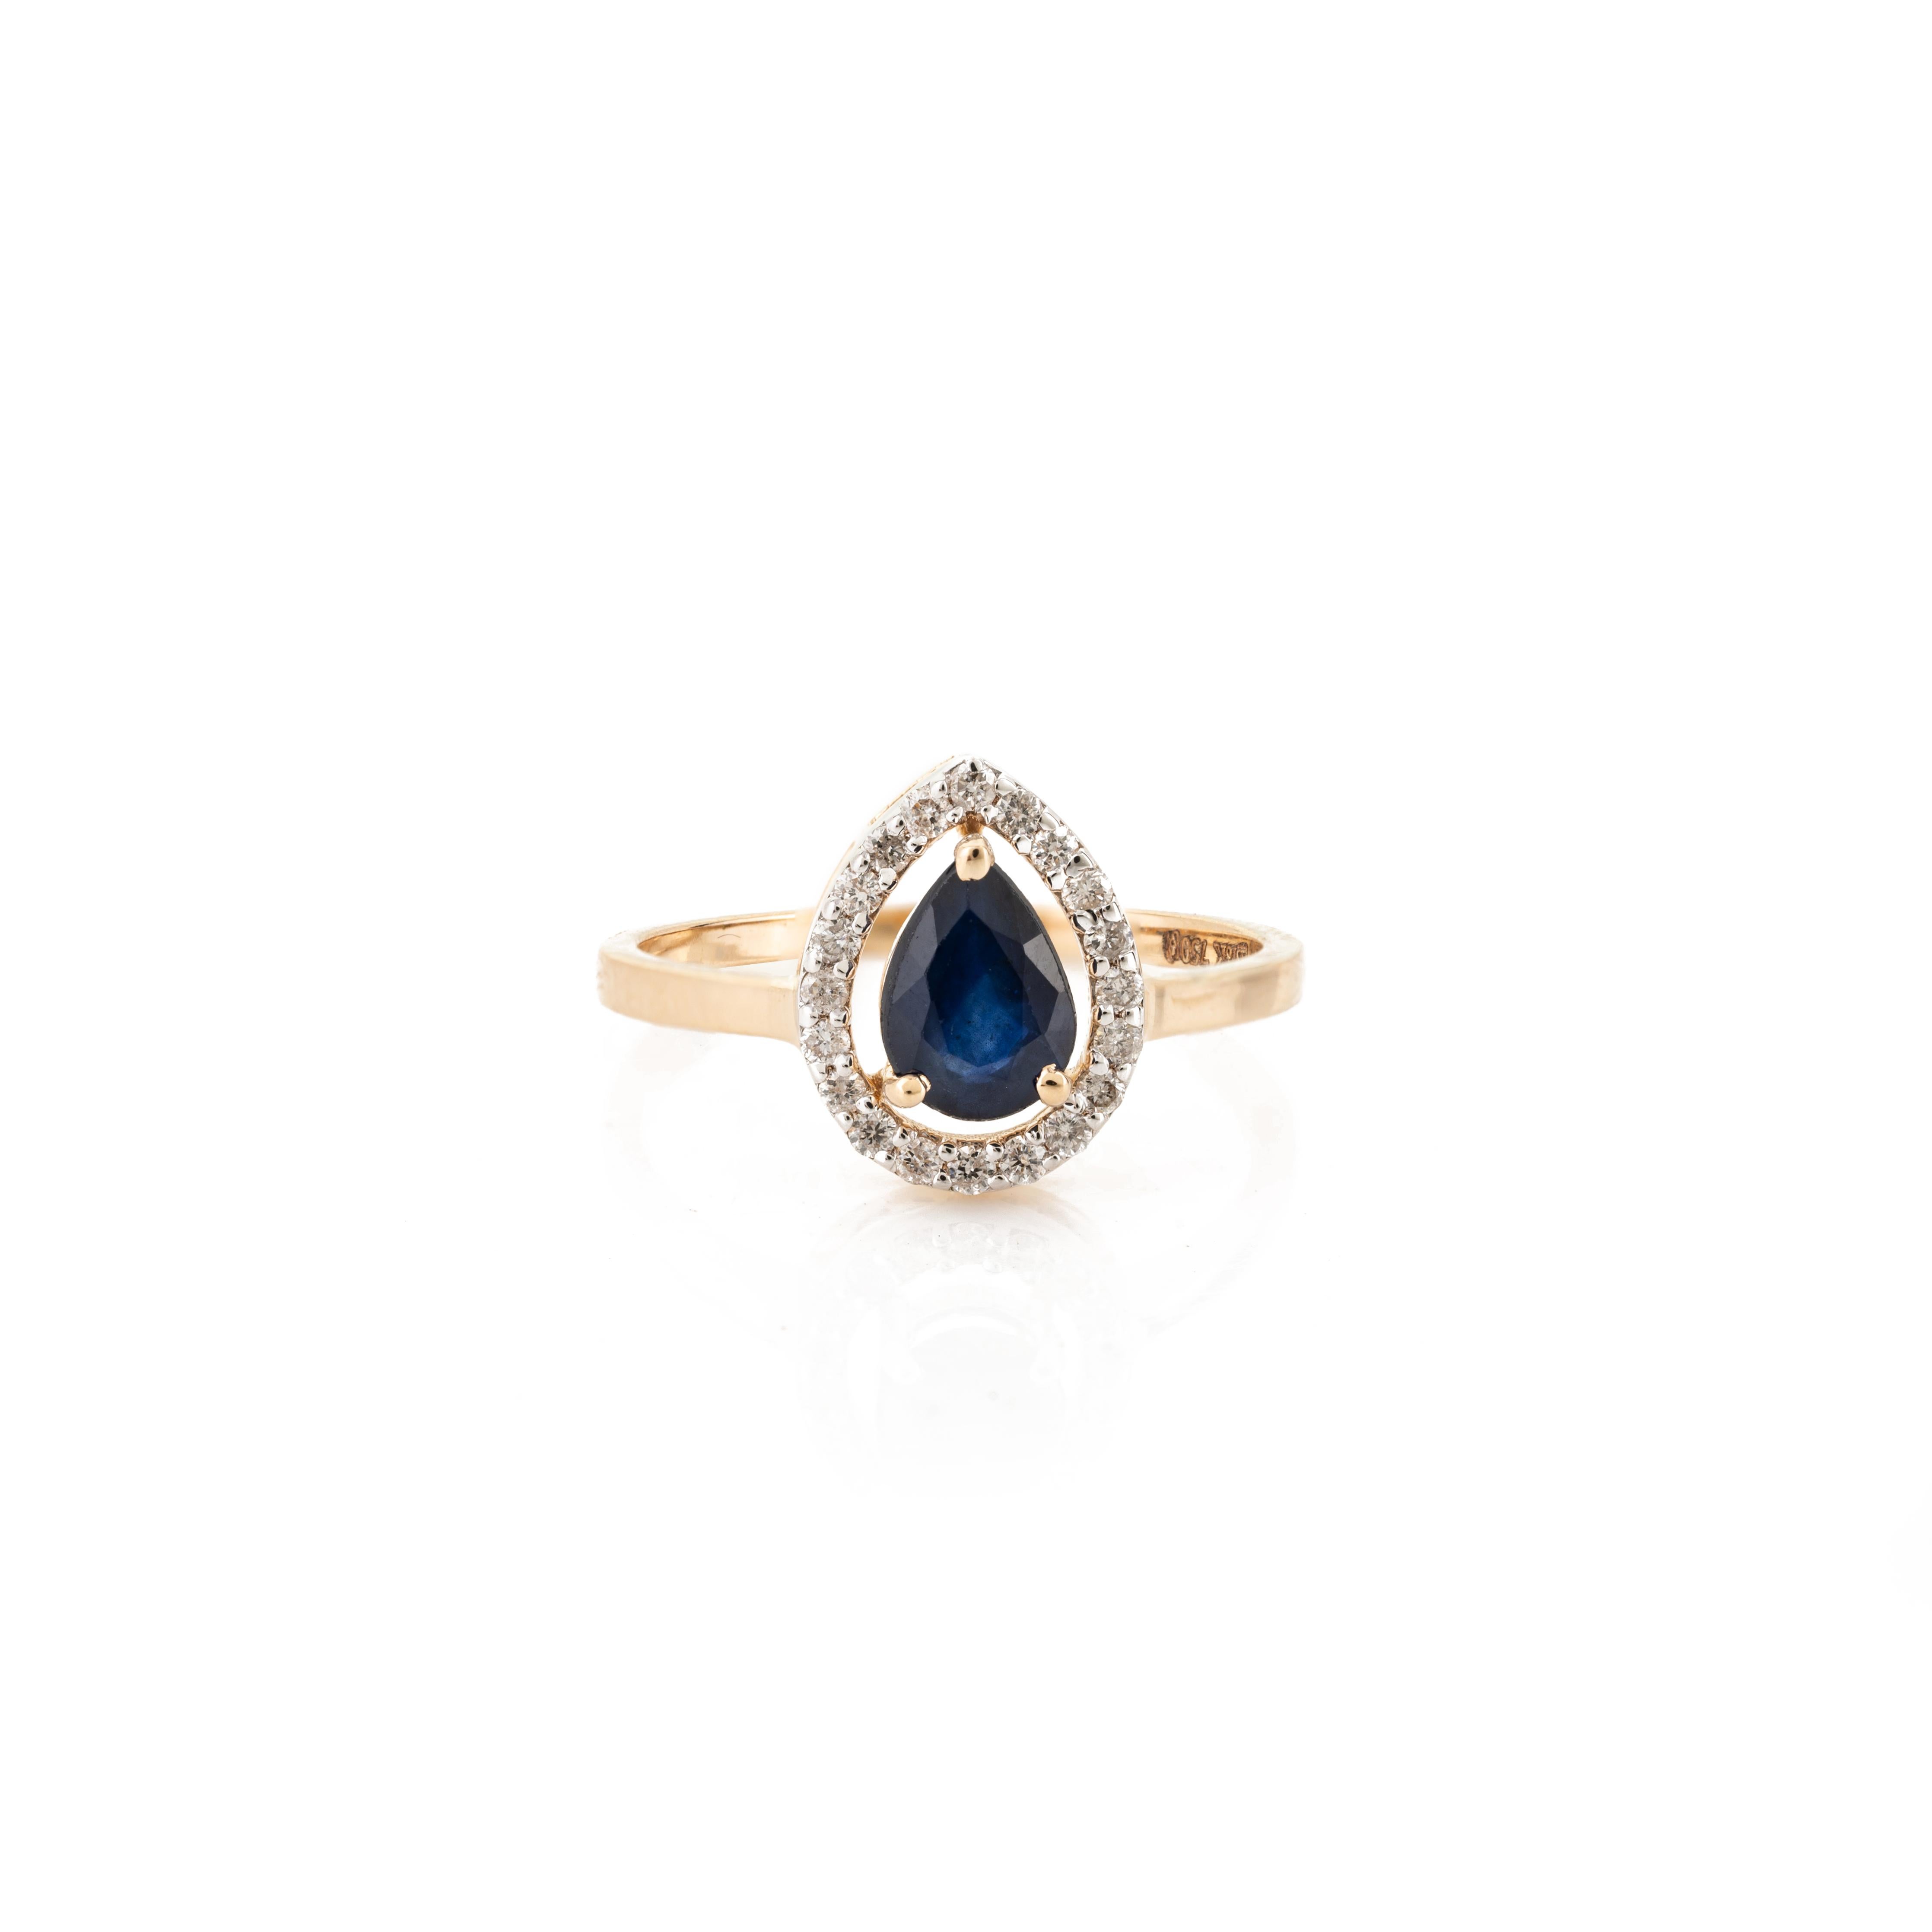 For Sale:  Pear Blue Sapphire Round Diamond Halo Engagement Ring Gift in 18k Yellow Gold 3